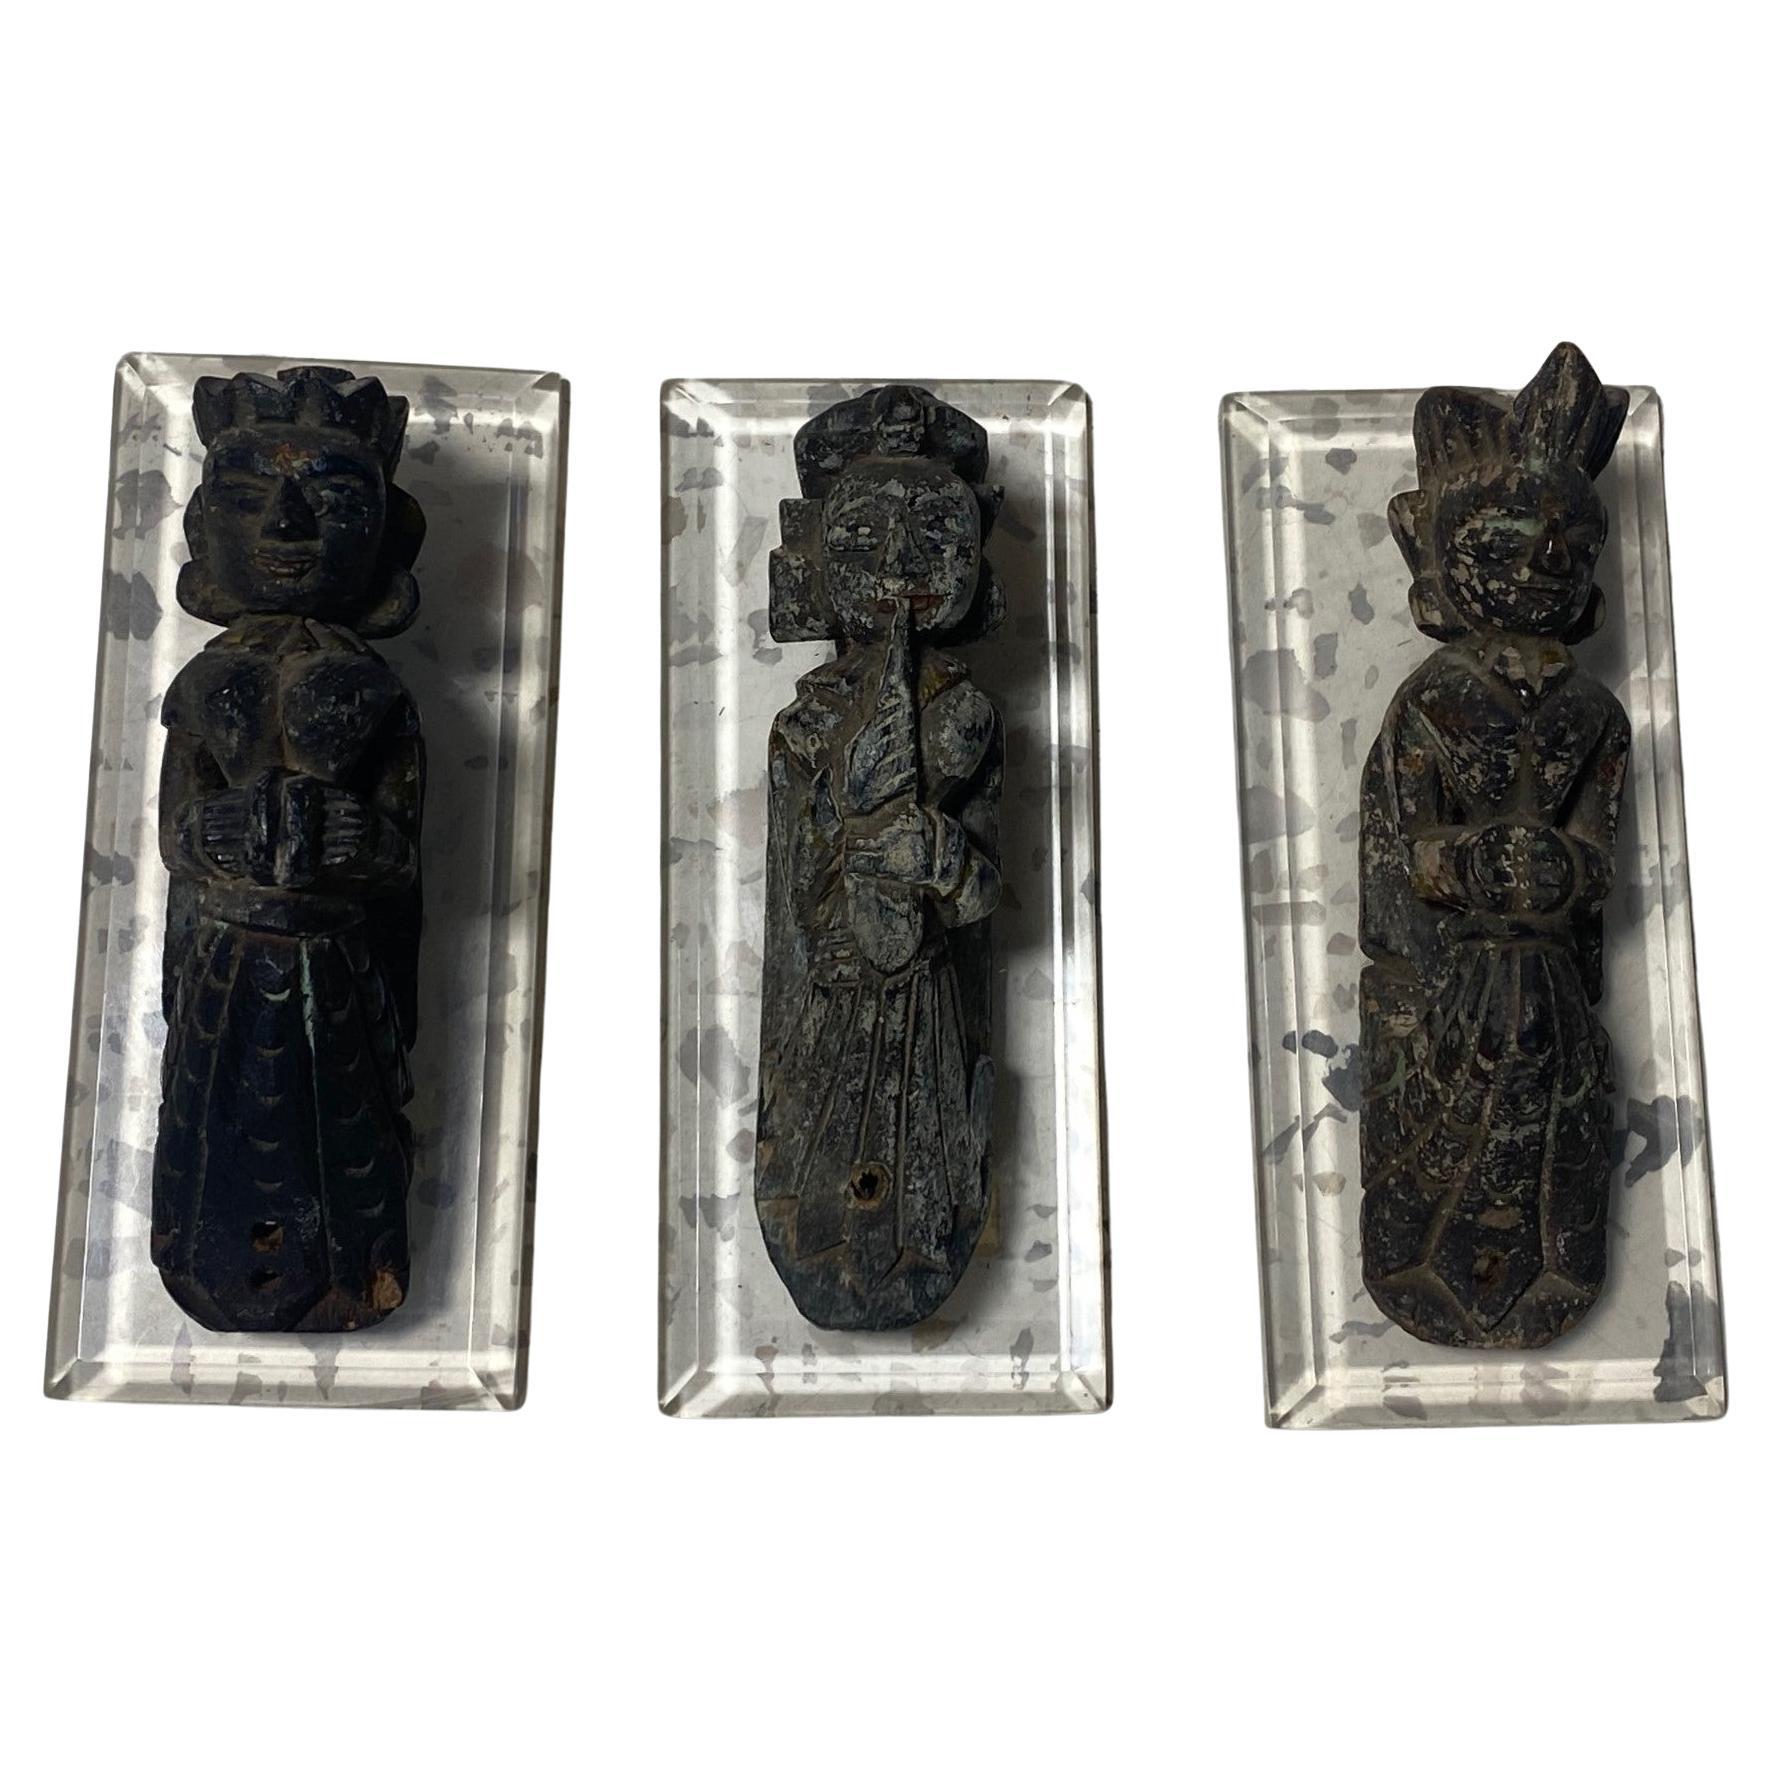 Three Sounth India Indian Nepalese Antique Hindu Temple Architecture Sculptures